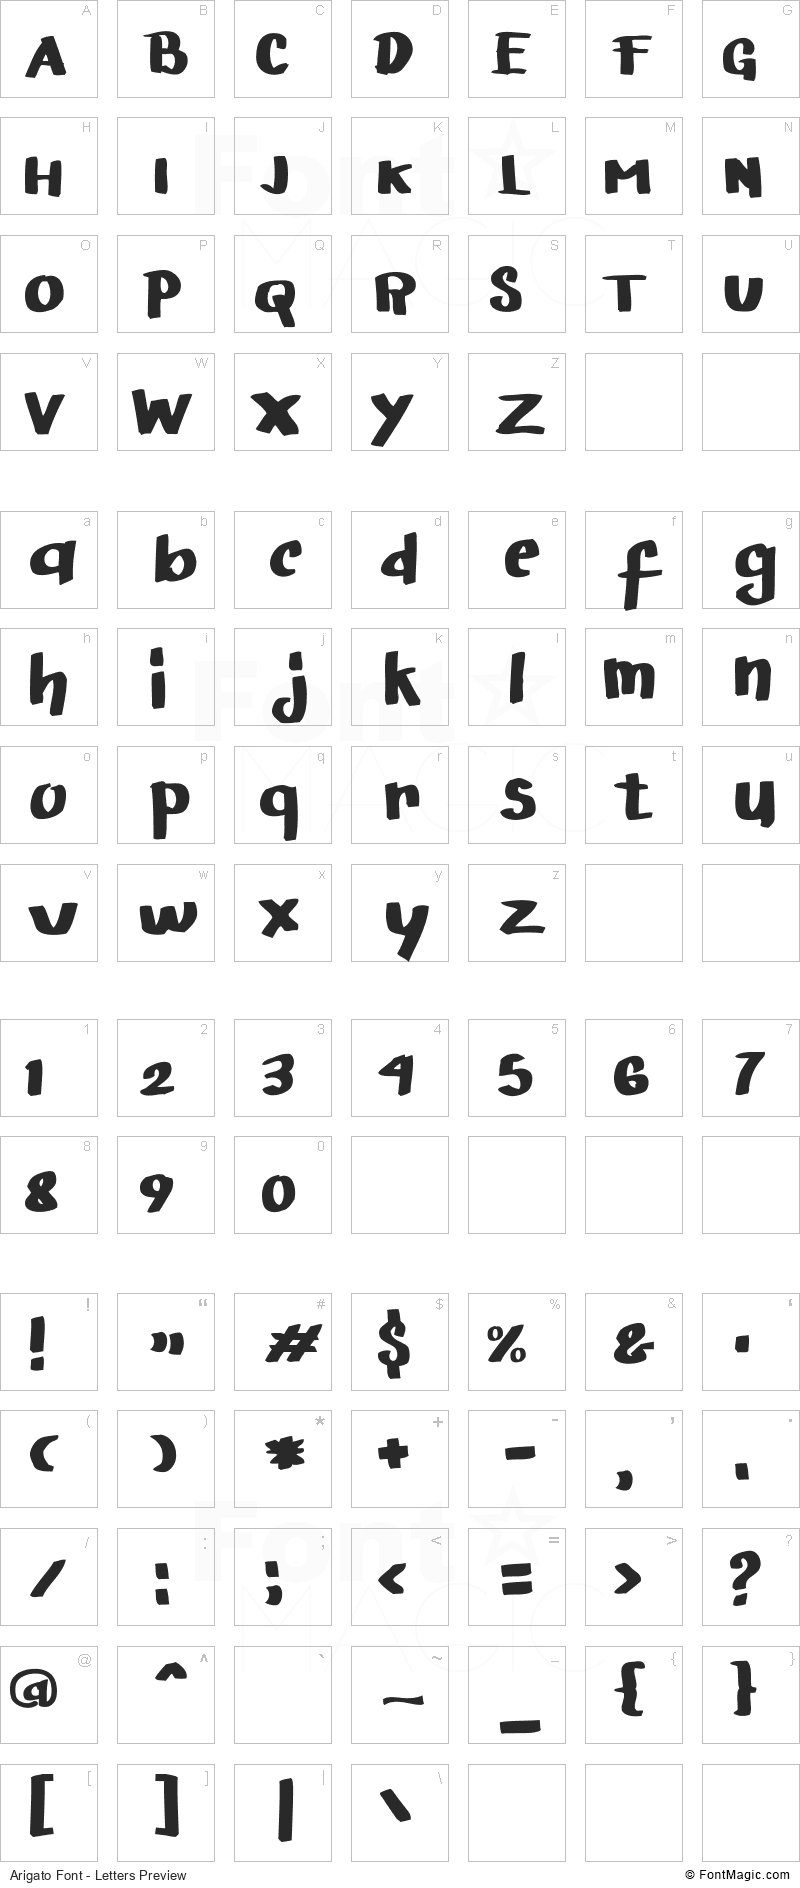 Arigato Font - All Latters Preview Chart